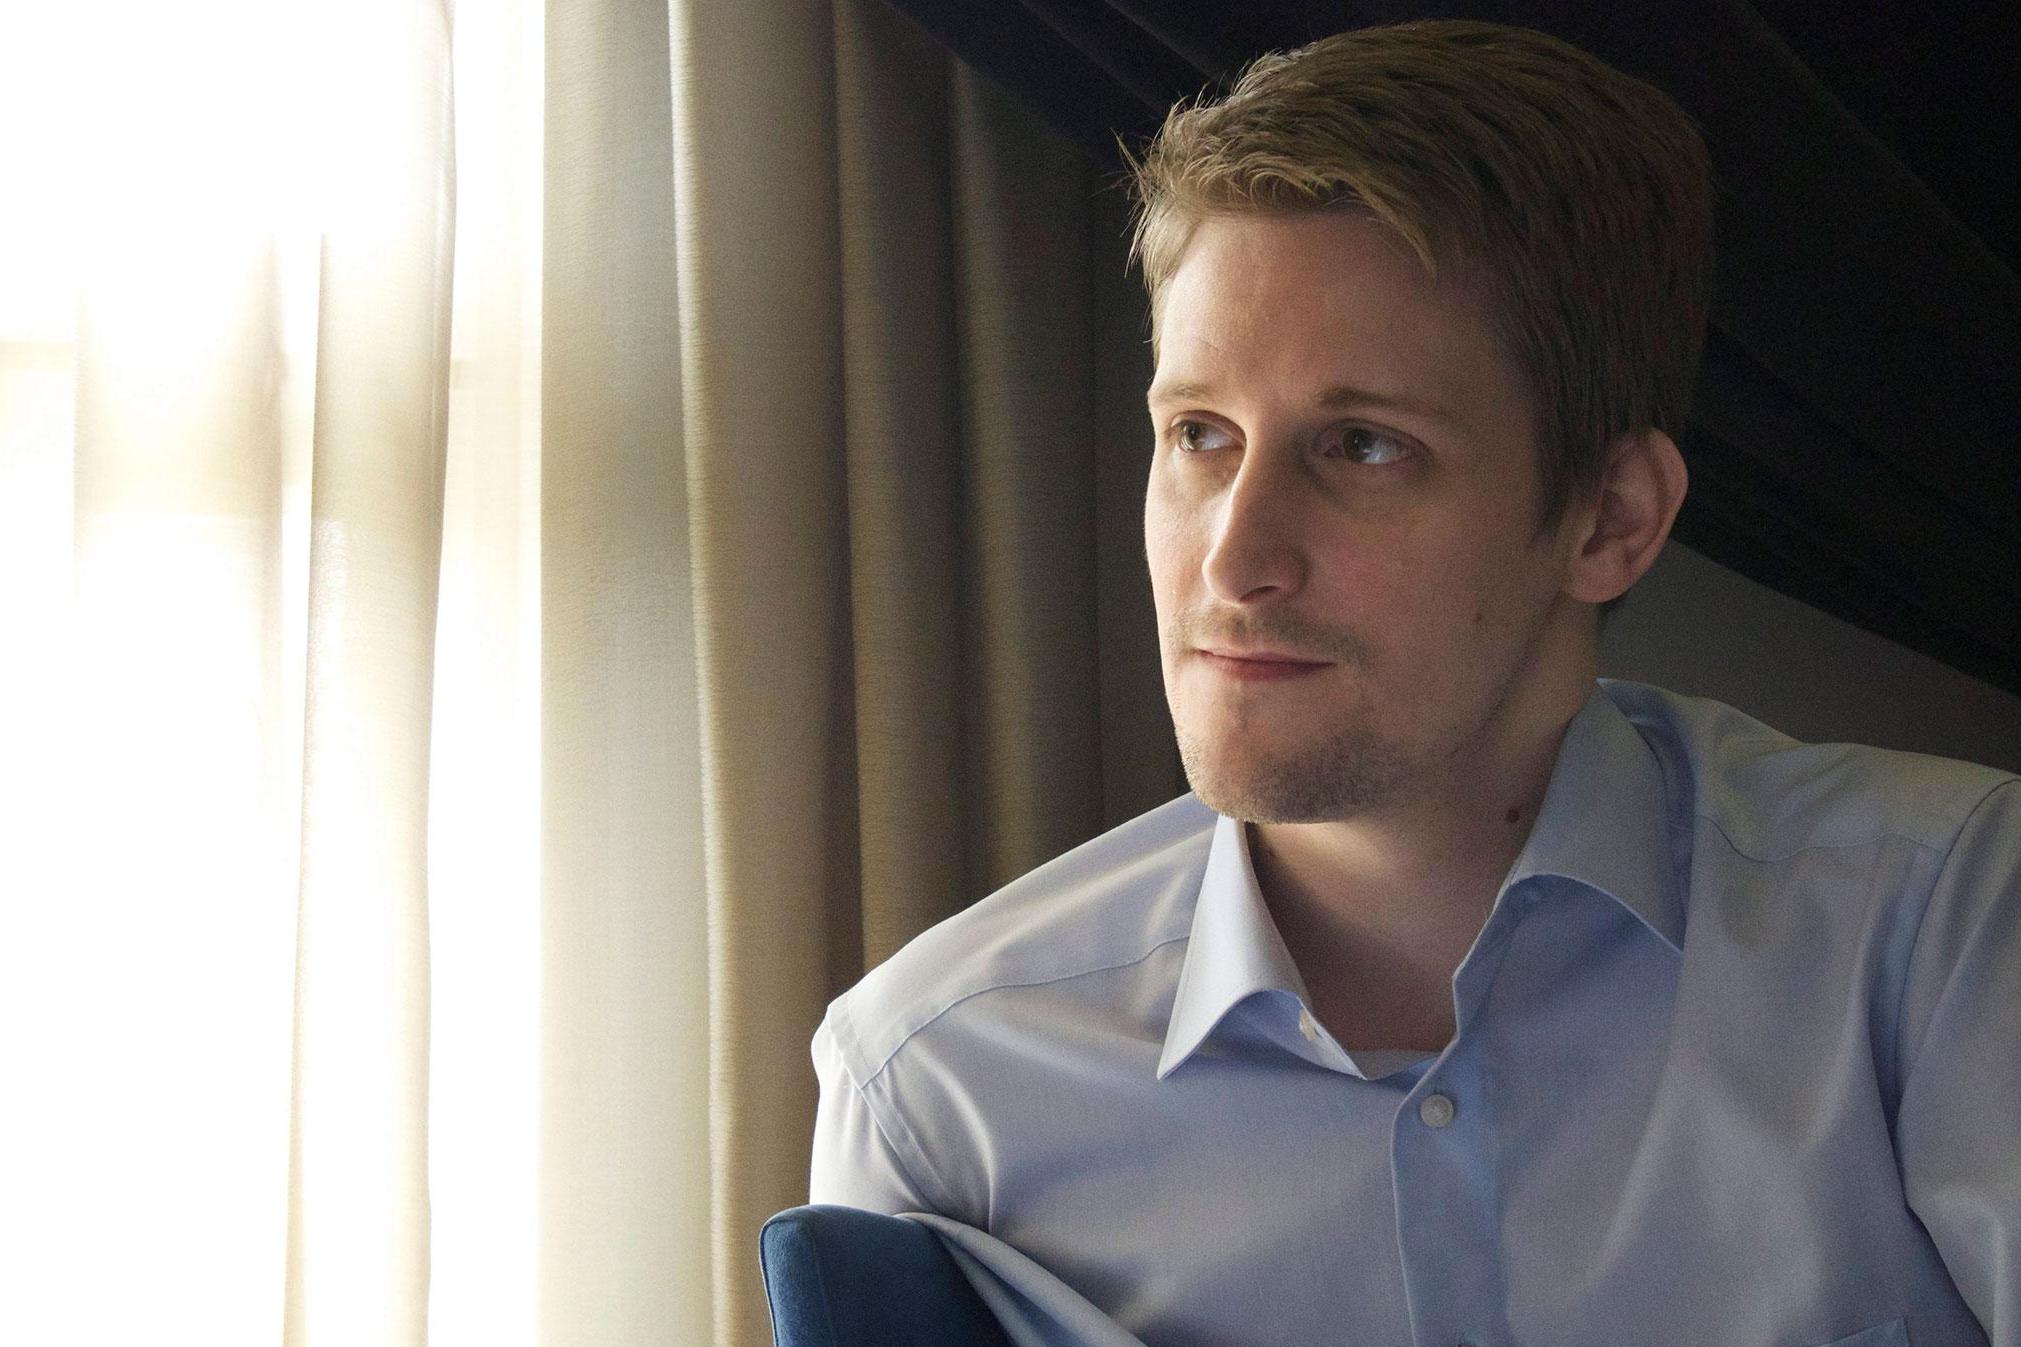 The new information casts doubt on Snowden's critics who say he could have operated via internal channels